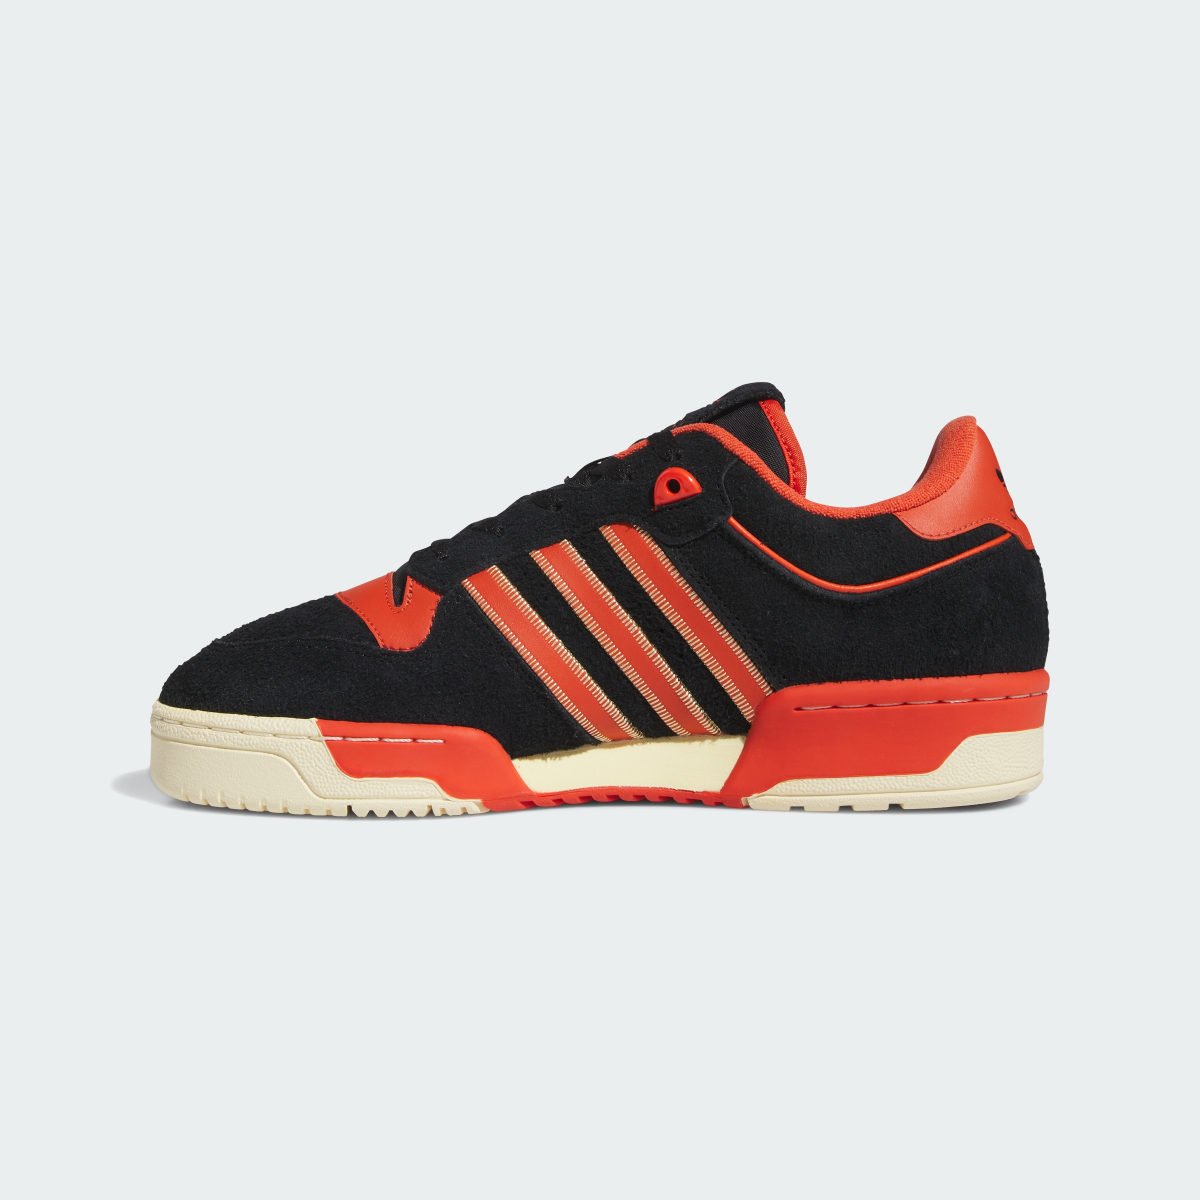 Adidas Rivalry 86 Low Shoes. 7